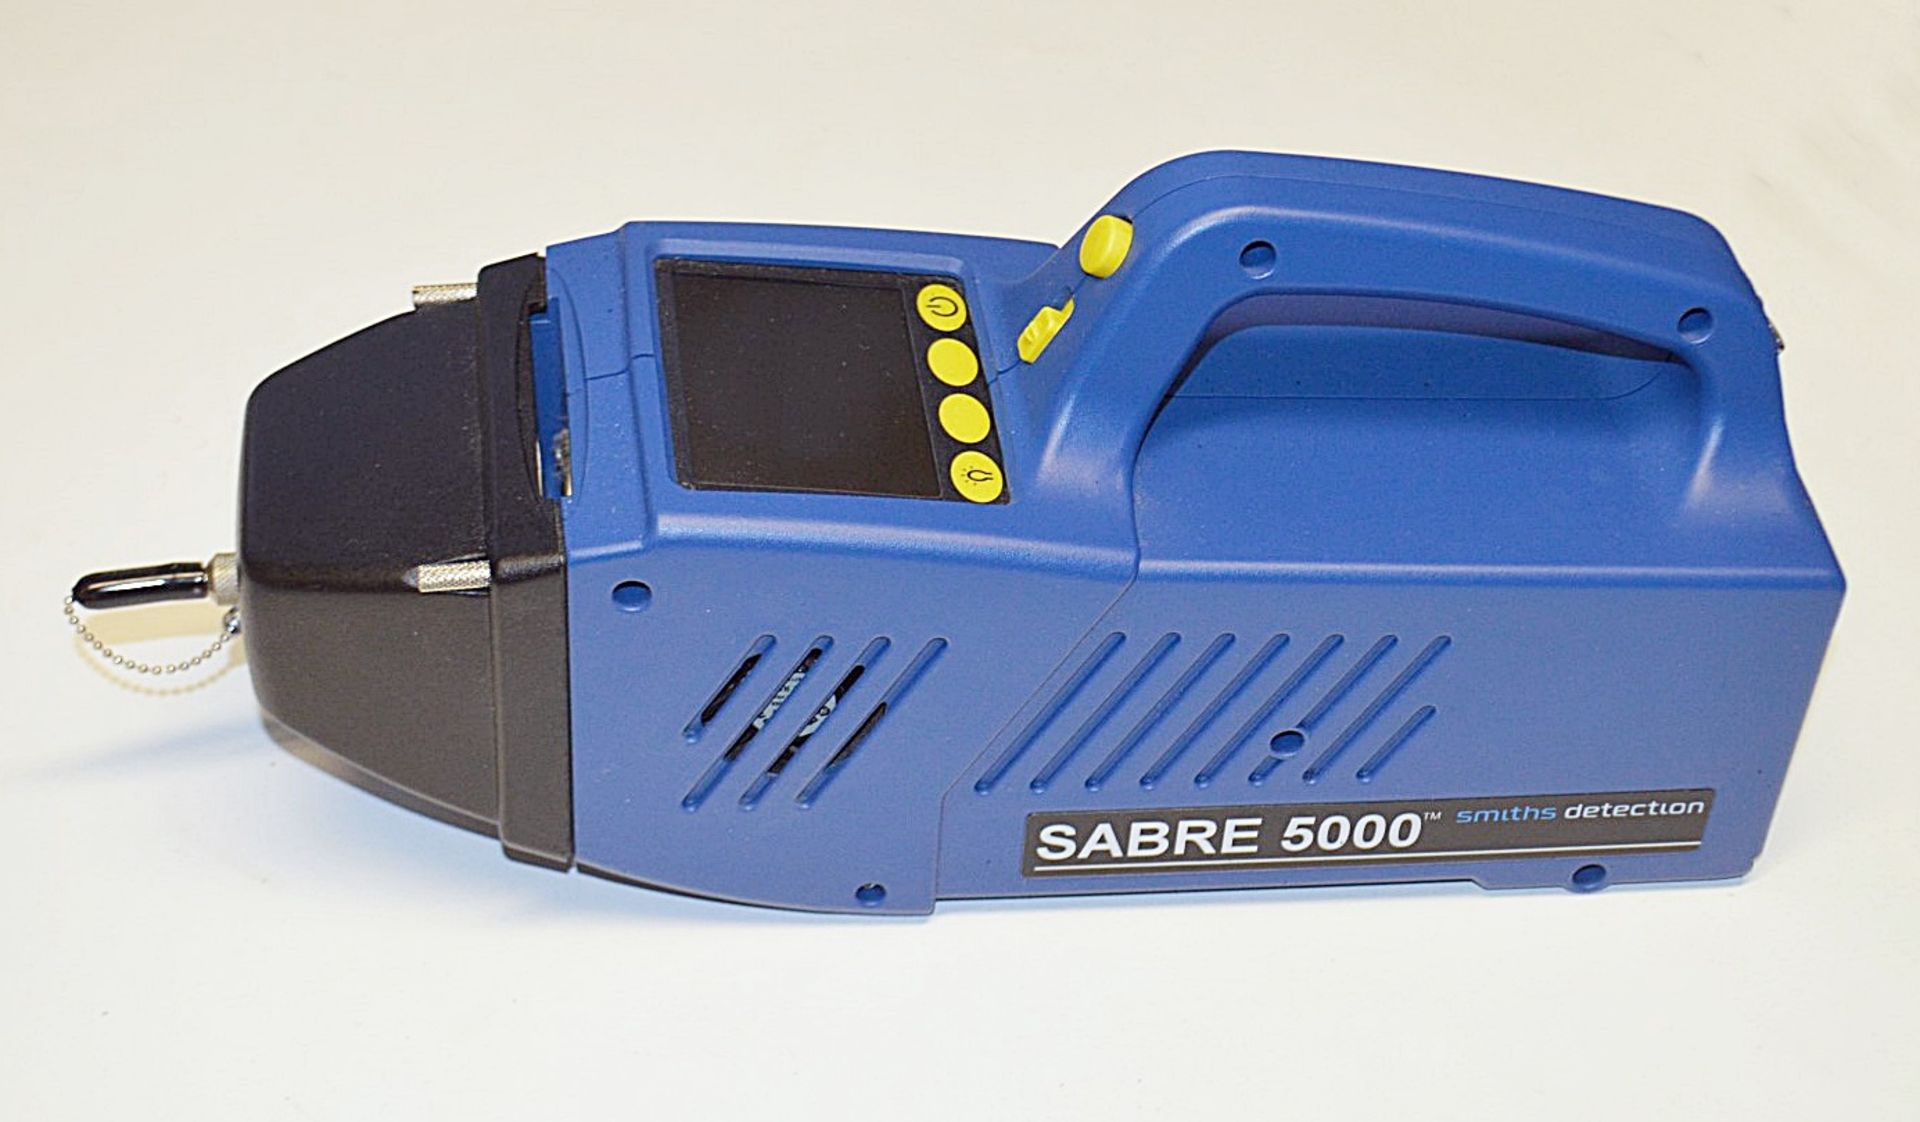 1 x SABRE™ 5000 Handheld Trace Detector - For Explosives, Chemical Agents And Toxic Chemicals - Image 2 of 31